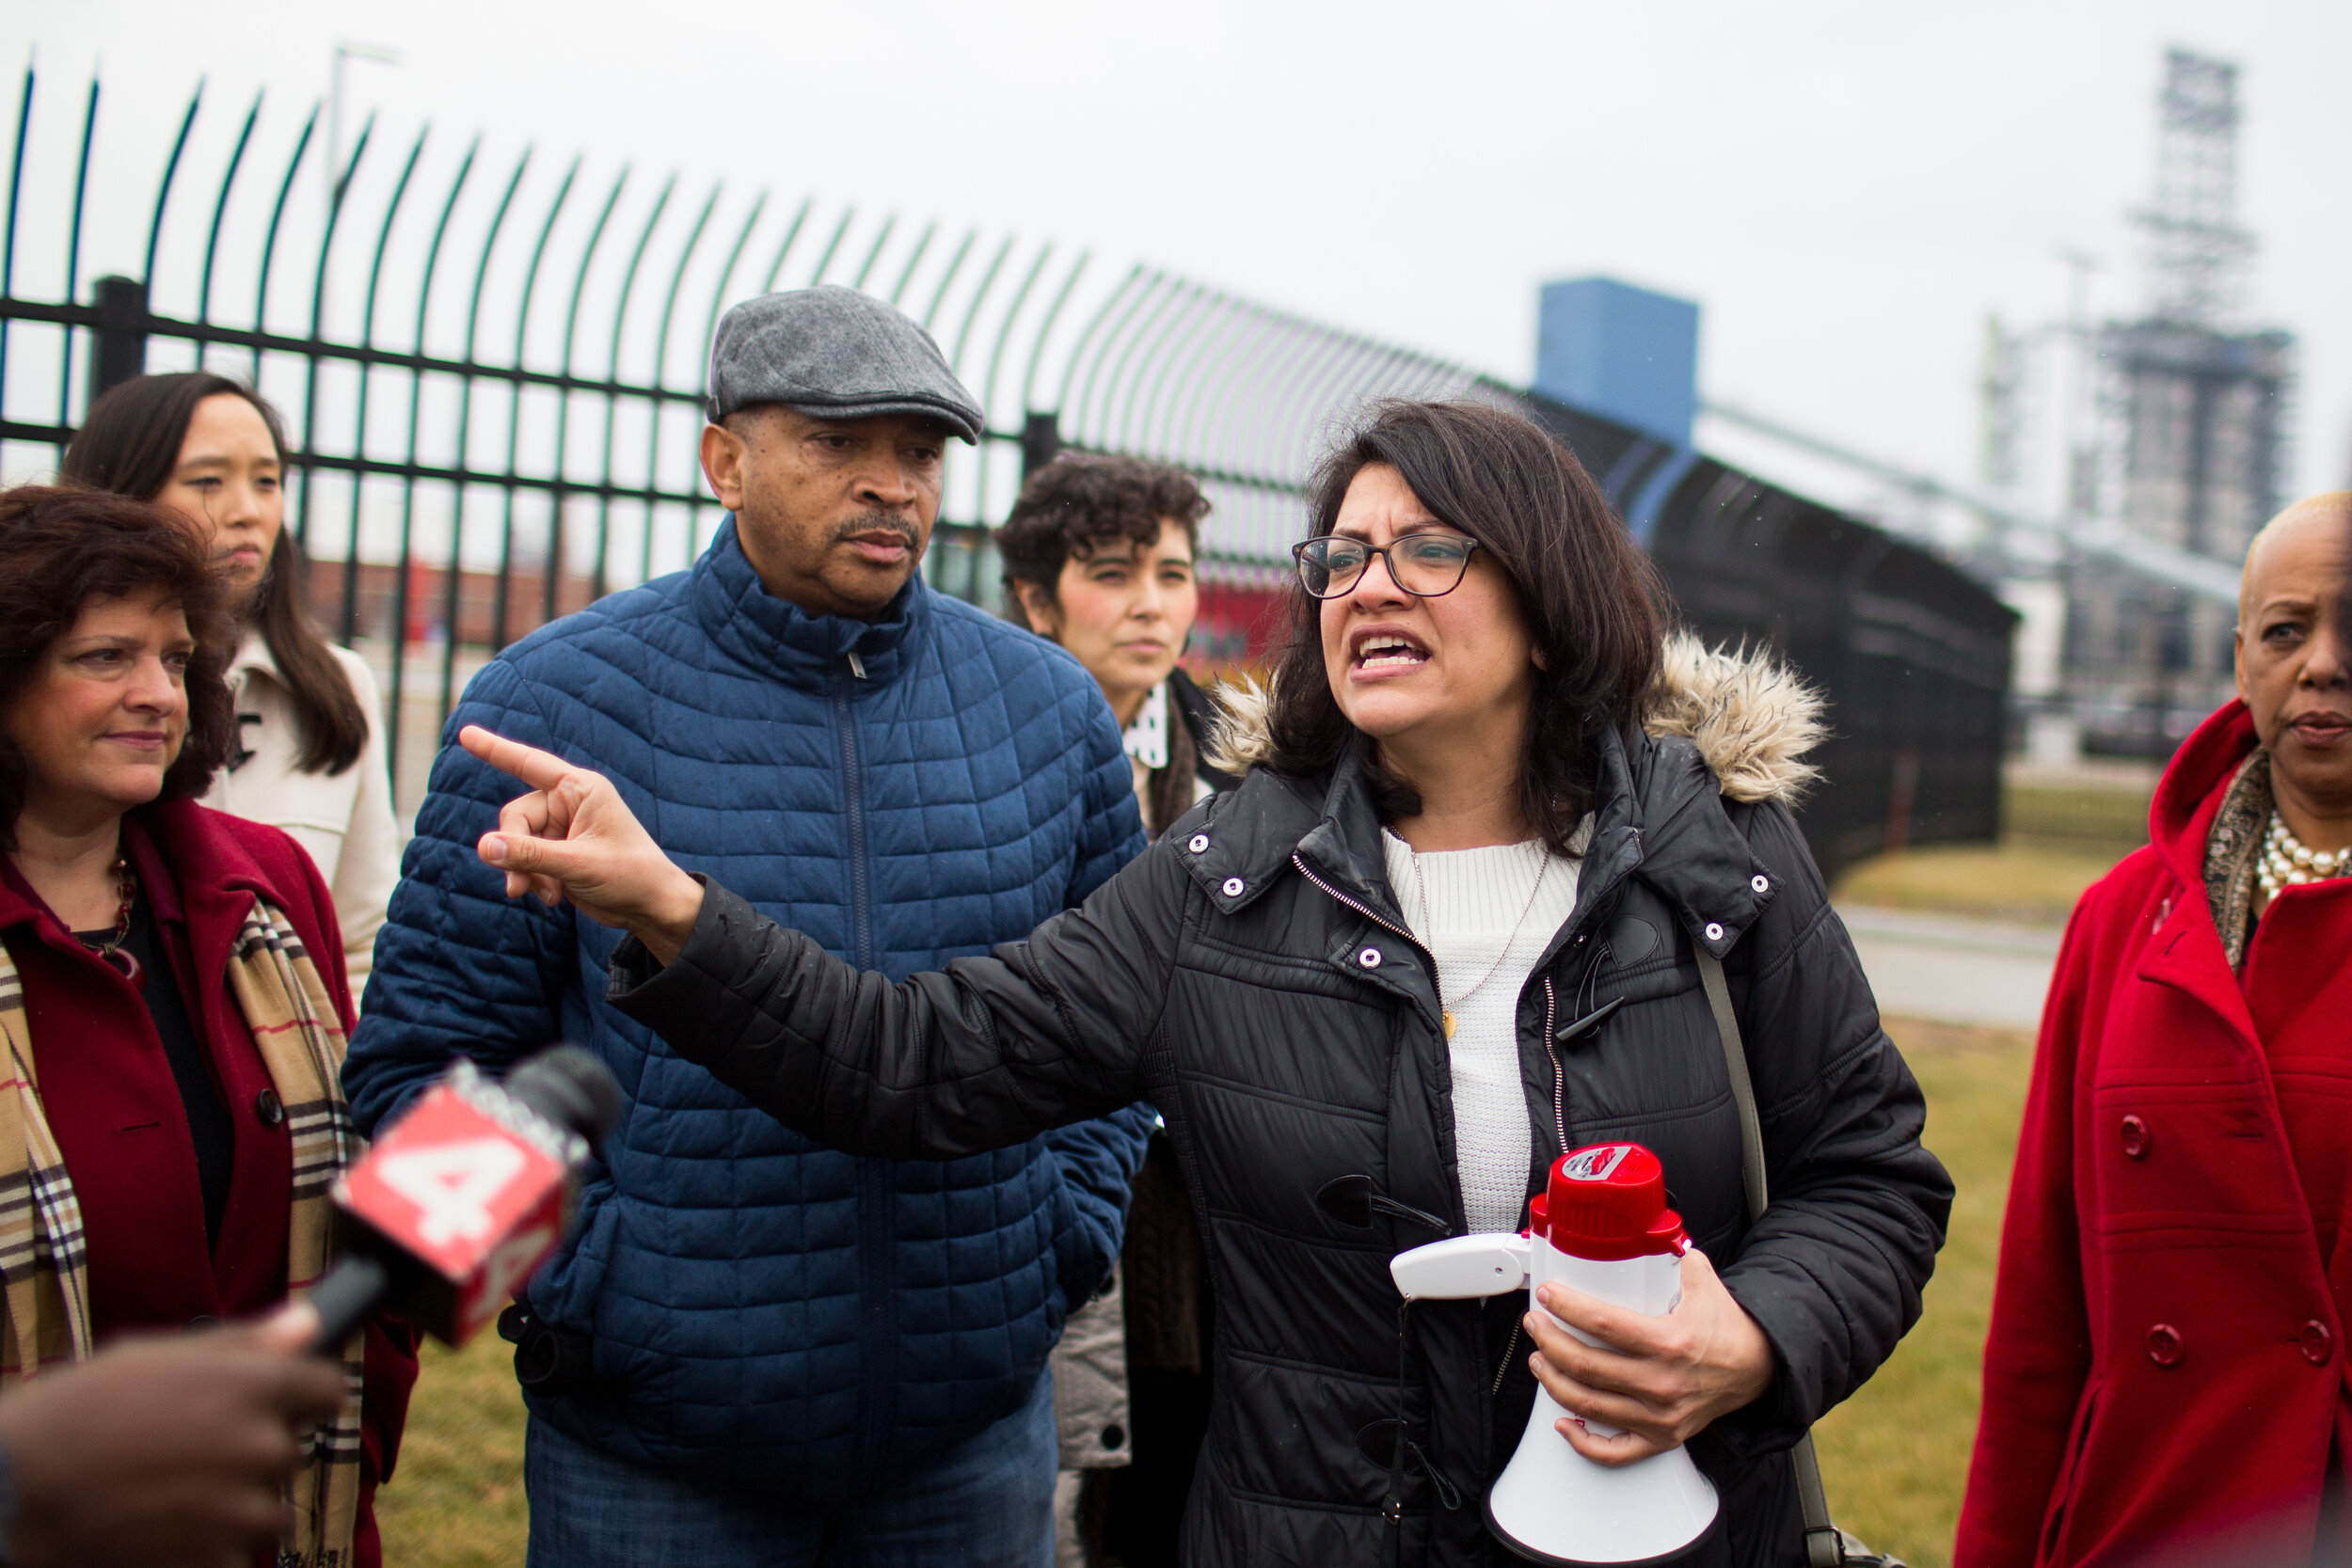  U.S. Rep. Rashida Tlaib speaks at a protest near the Marathon Petroleum Co. oil refinery in Detroit, Mich., on Monday, Feb. 4, 2019 after a malfunctioning flare released foul-smelling chemicals into the air, which many nearby residents alleged made 